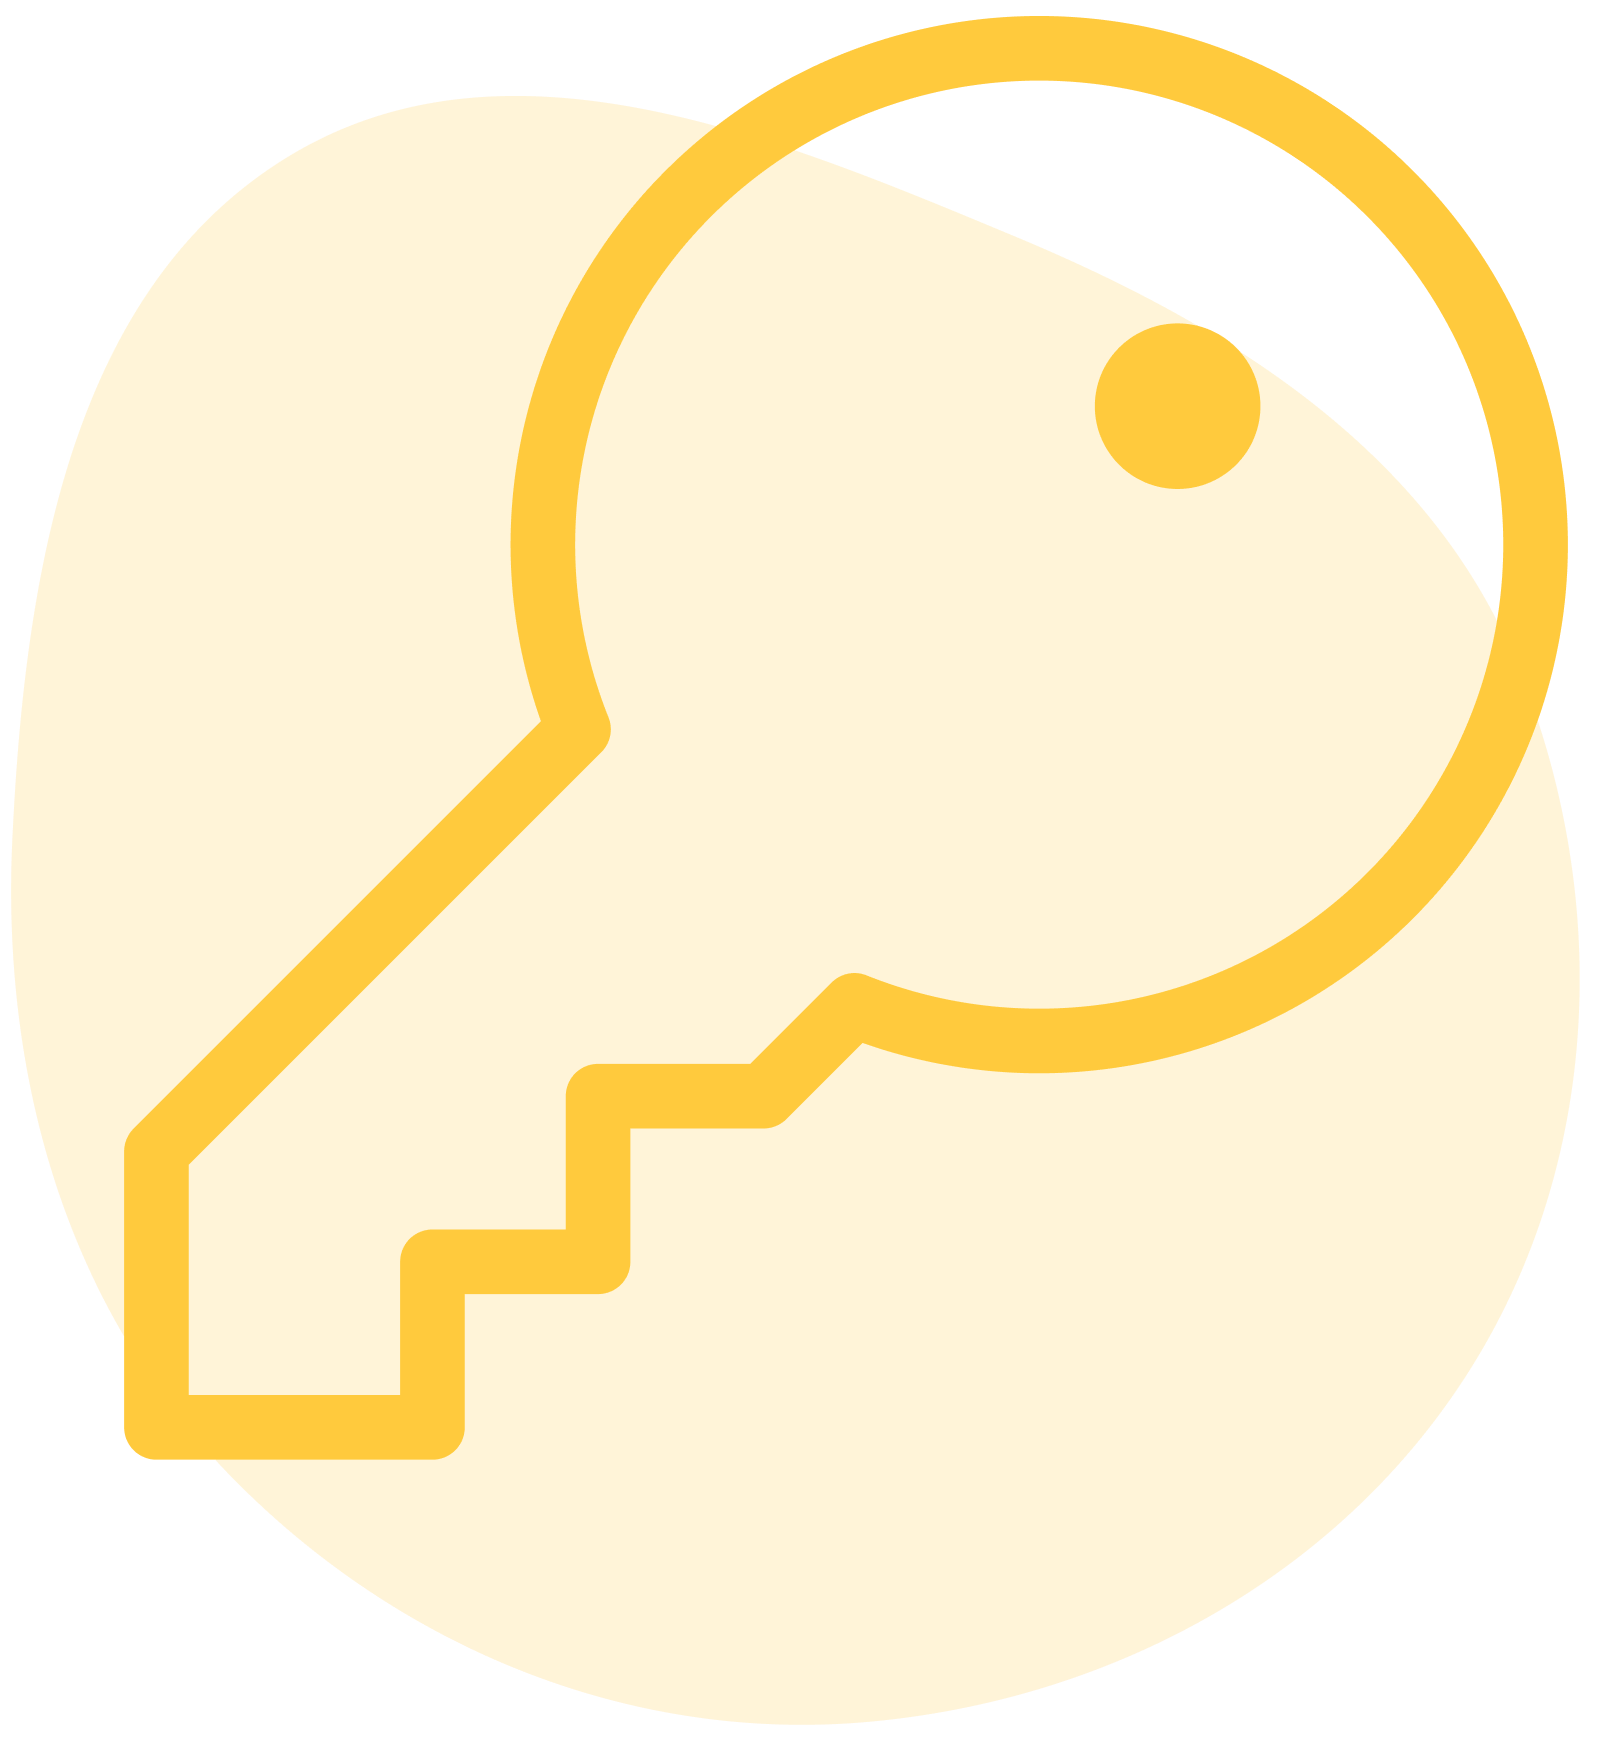 Vector art of a simple yellow key